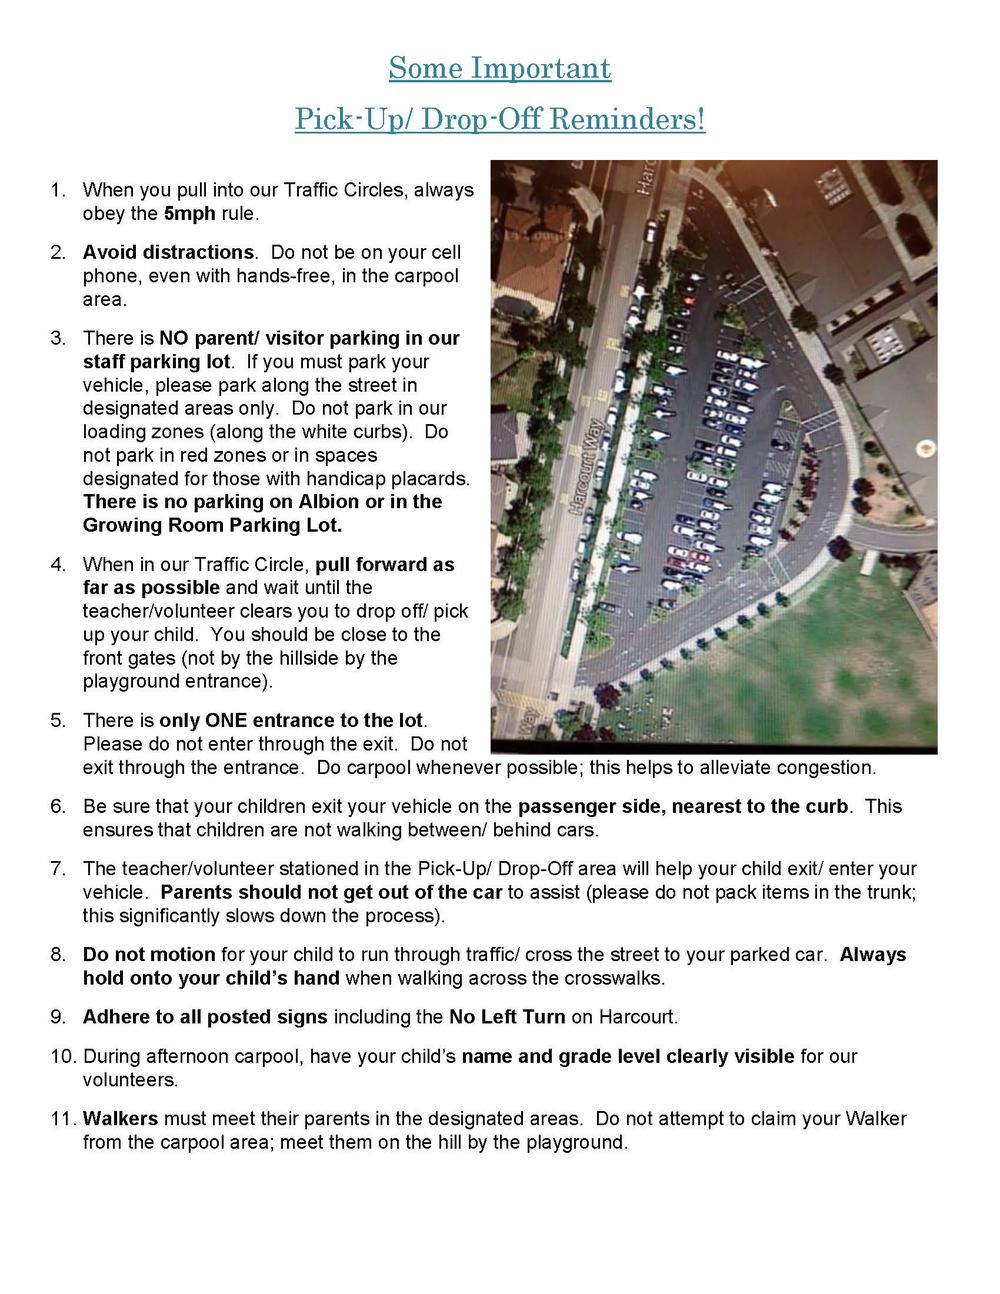 Parking Safety Guidelines with pictures Page 1